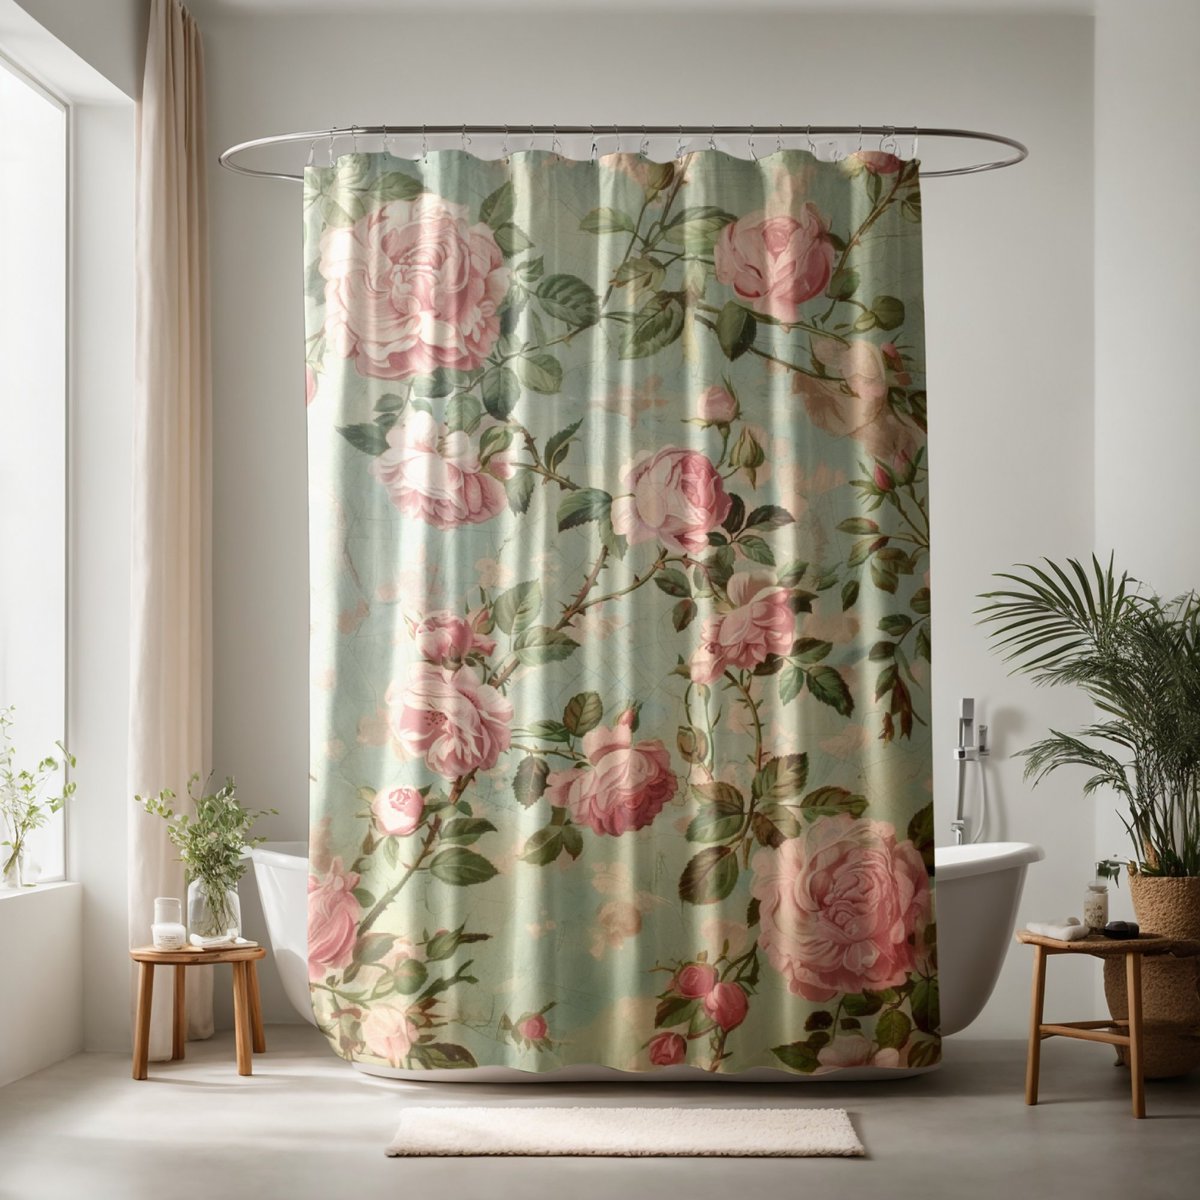 Pink Bold Roses Shabby Chic Shower Curtain, Vintage Bathroom D by InfiitePrints etsy.me/3JMea45 via @Etsy 

#showercurtain #pinkshowercurtain #roses #shabbychic #vintage #vintagefloral #vintagebath #vintageshower #vintagedecor #country #countrydecor #countrybath #cottage